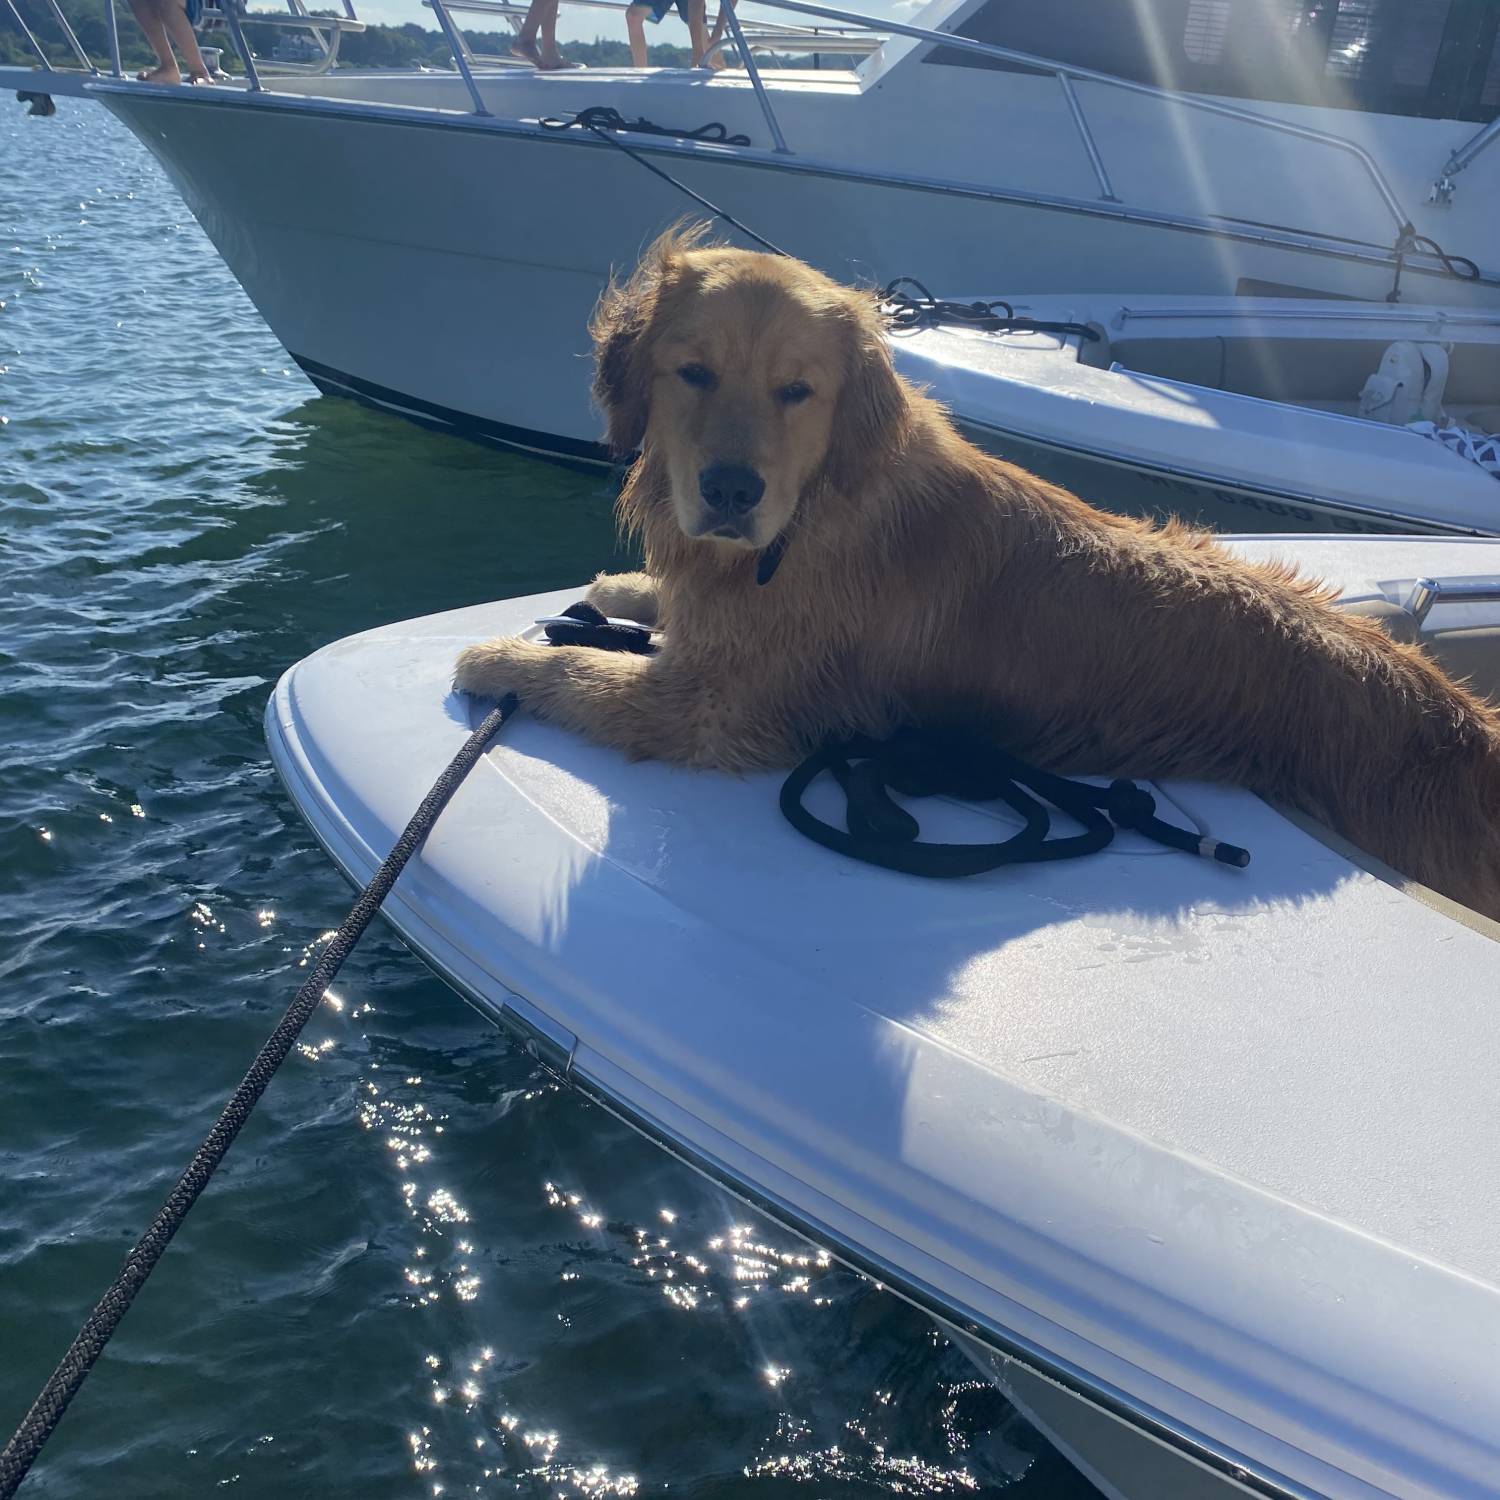 Brewer catching some sun on the bow during a flotilla in Hobbs Hole, Plymouth!